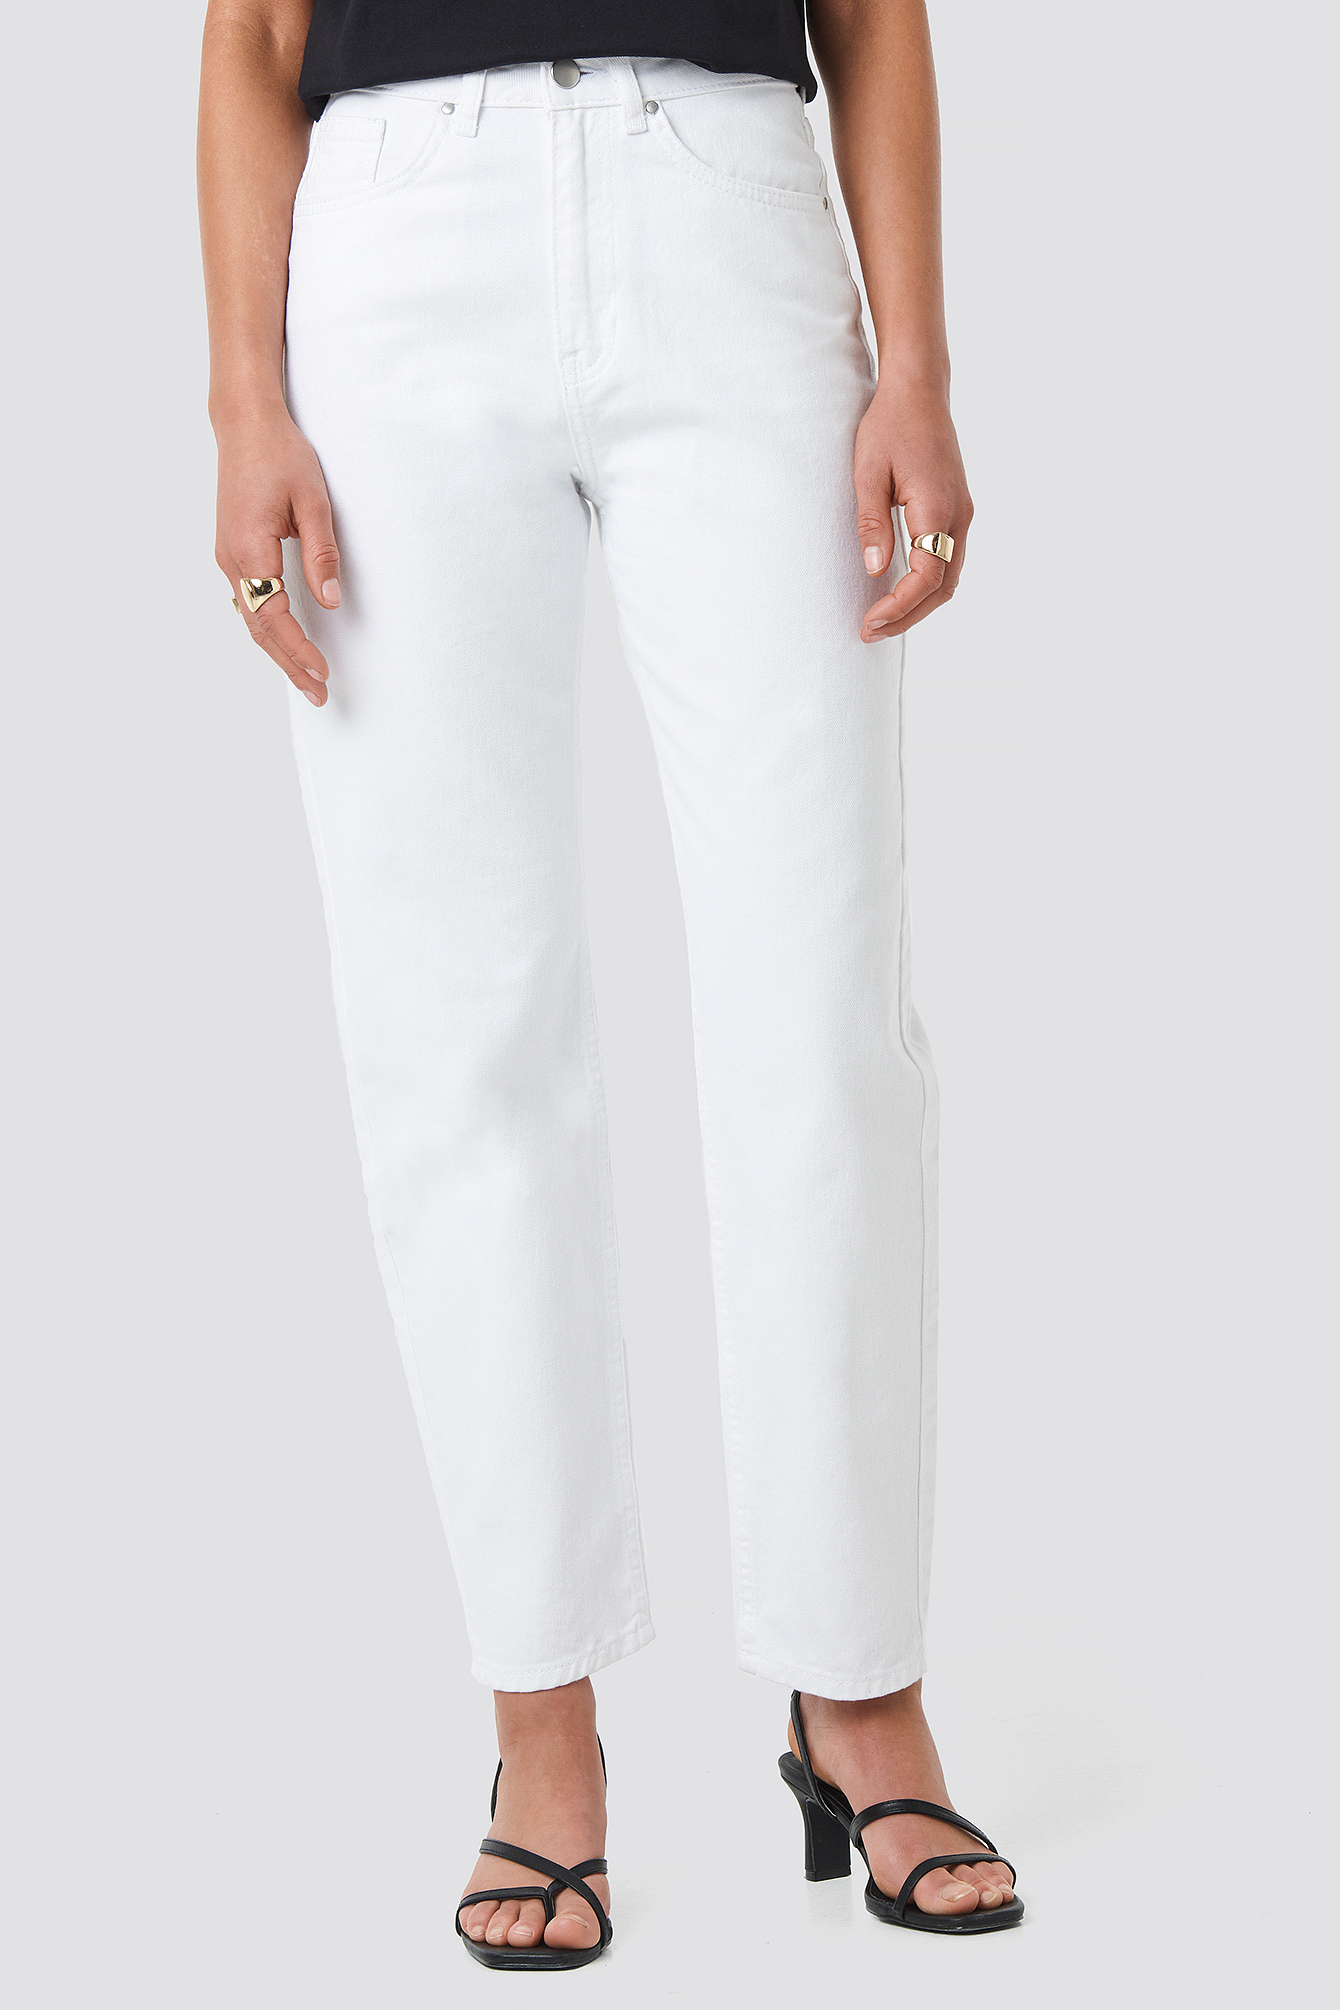 White Pocket Embroidered Jeans